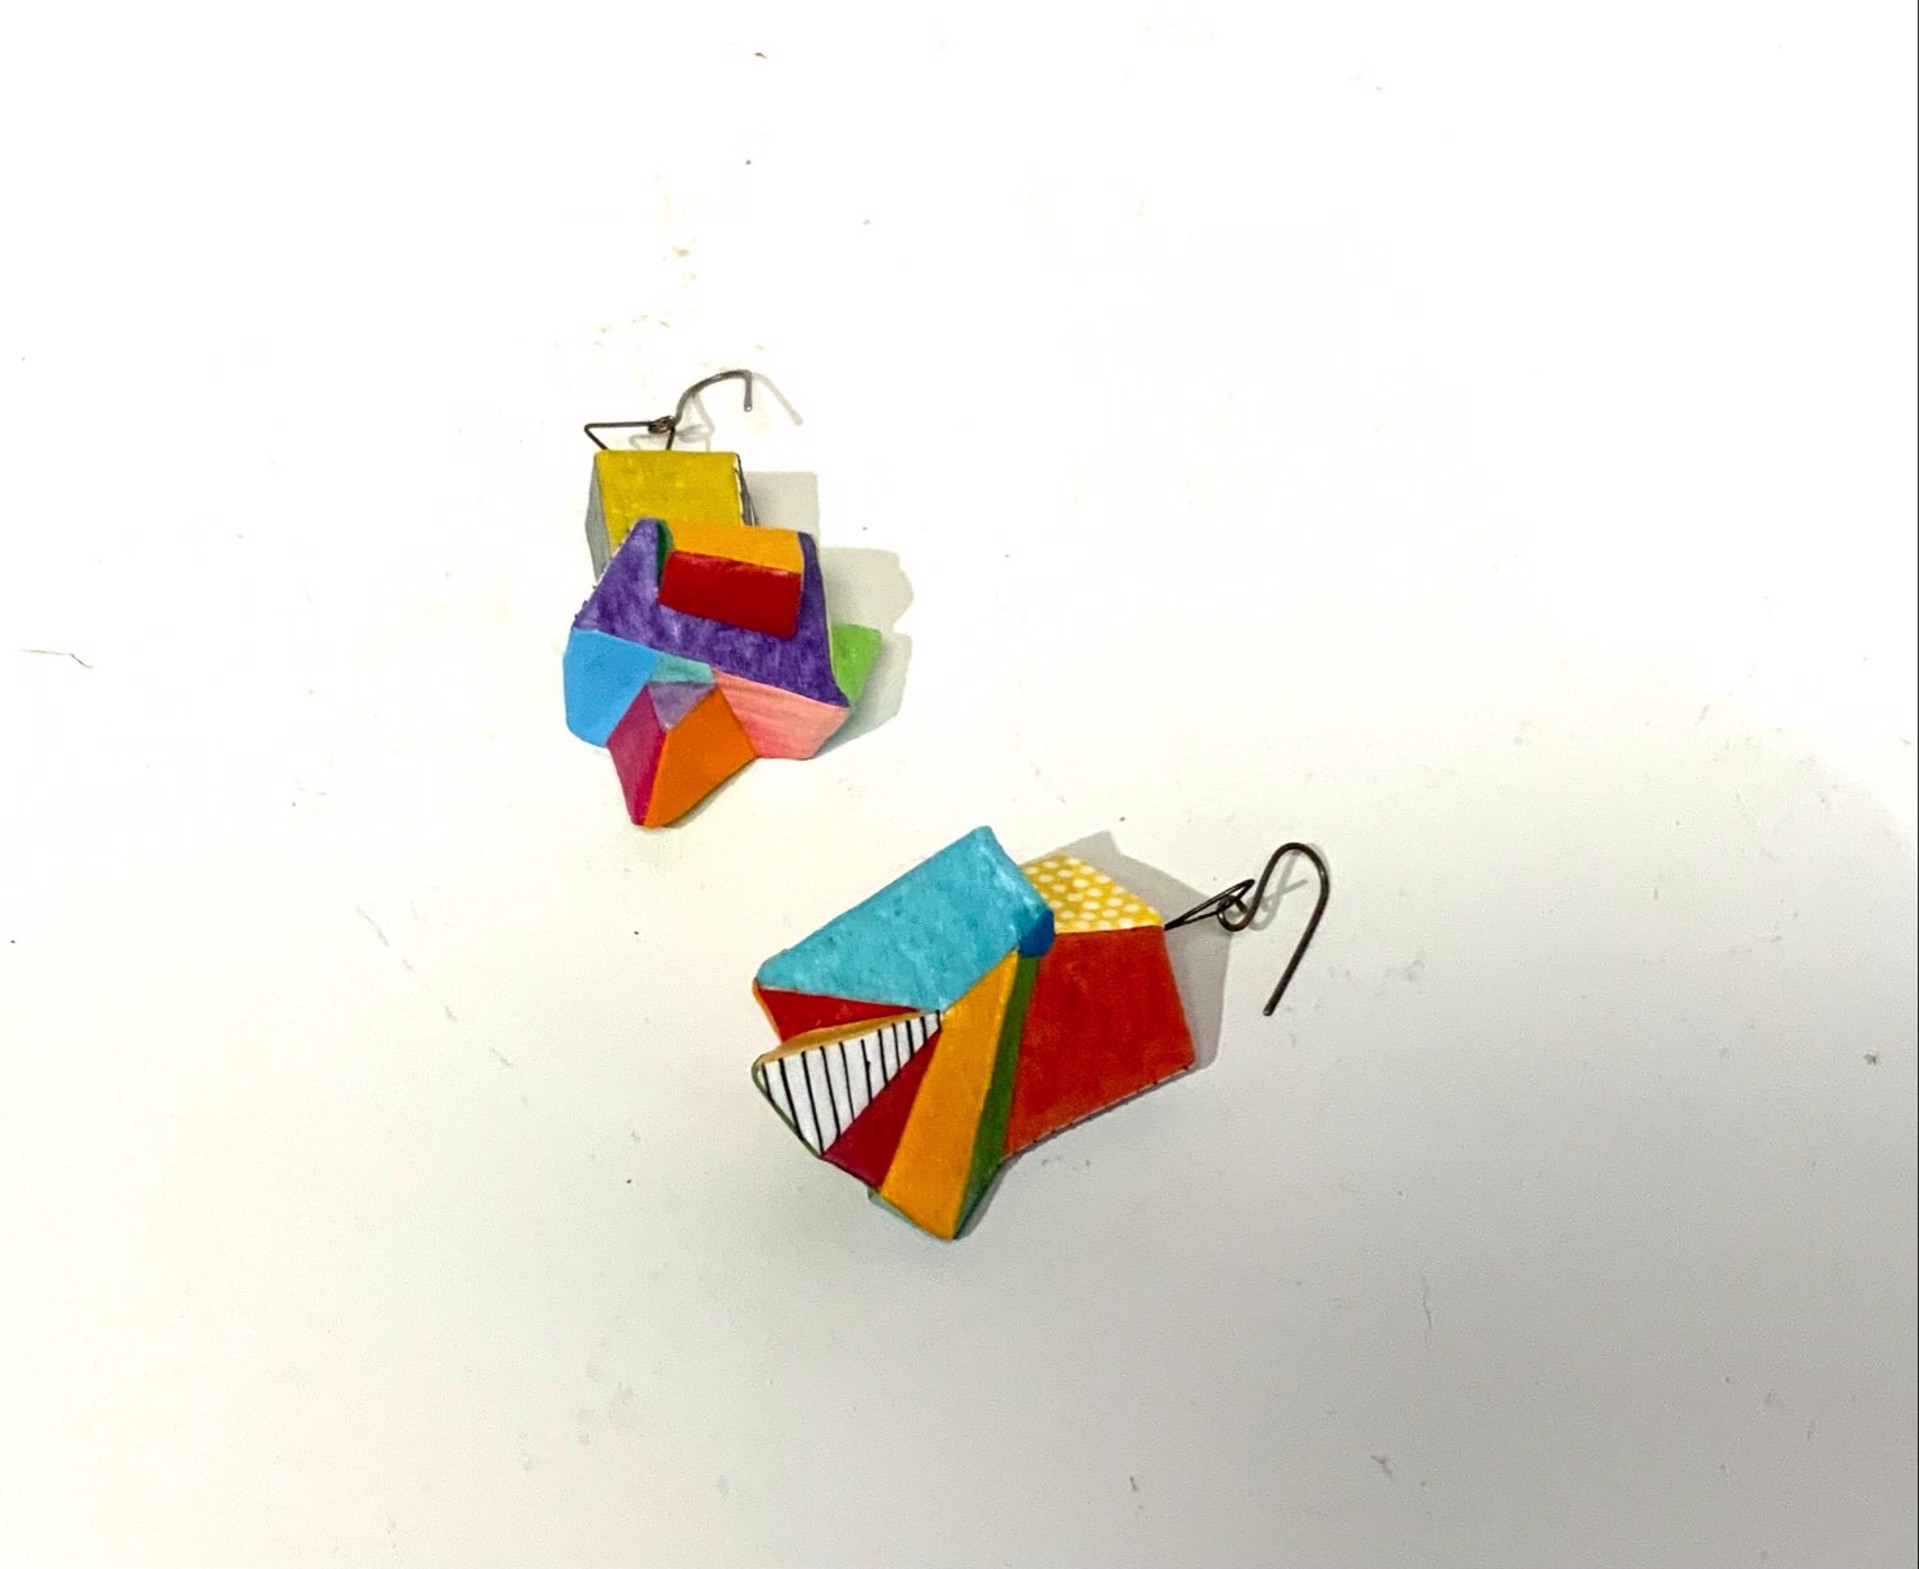 Facets Earrings by Sally Prangley